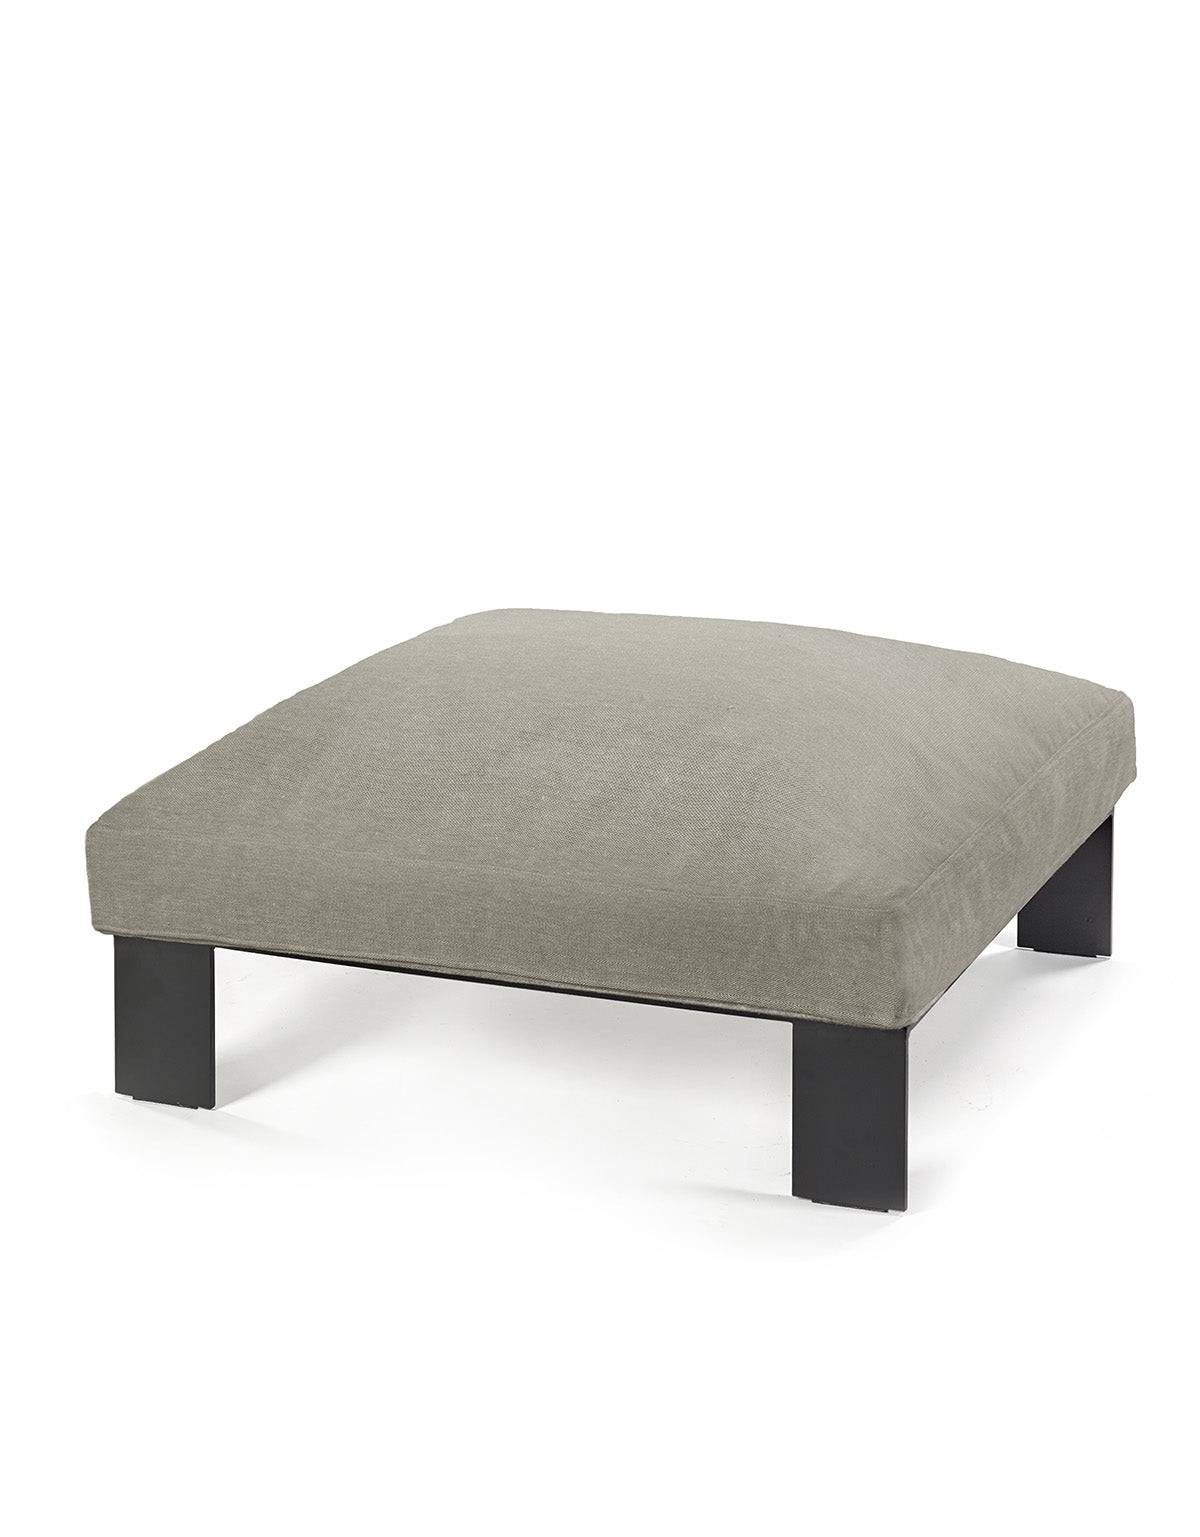 Mombaers Ottoman - Taupe - THAT COOL LIVING